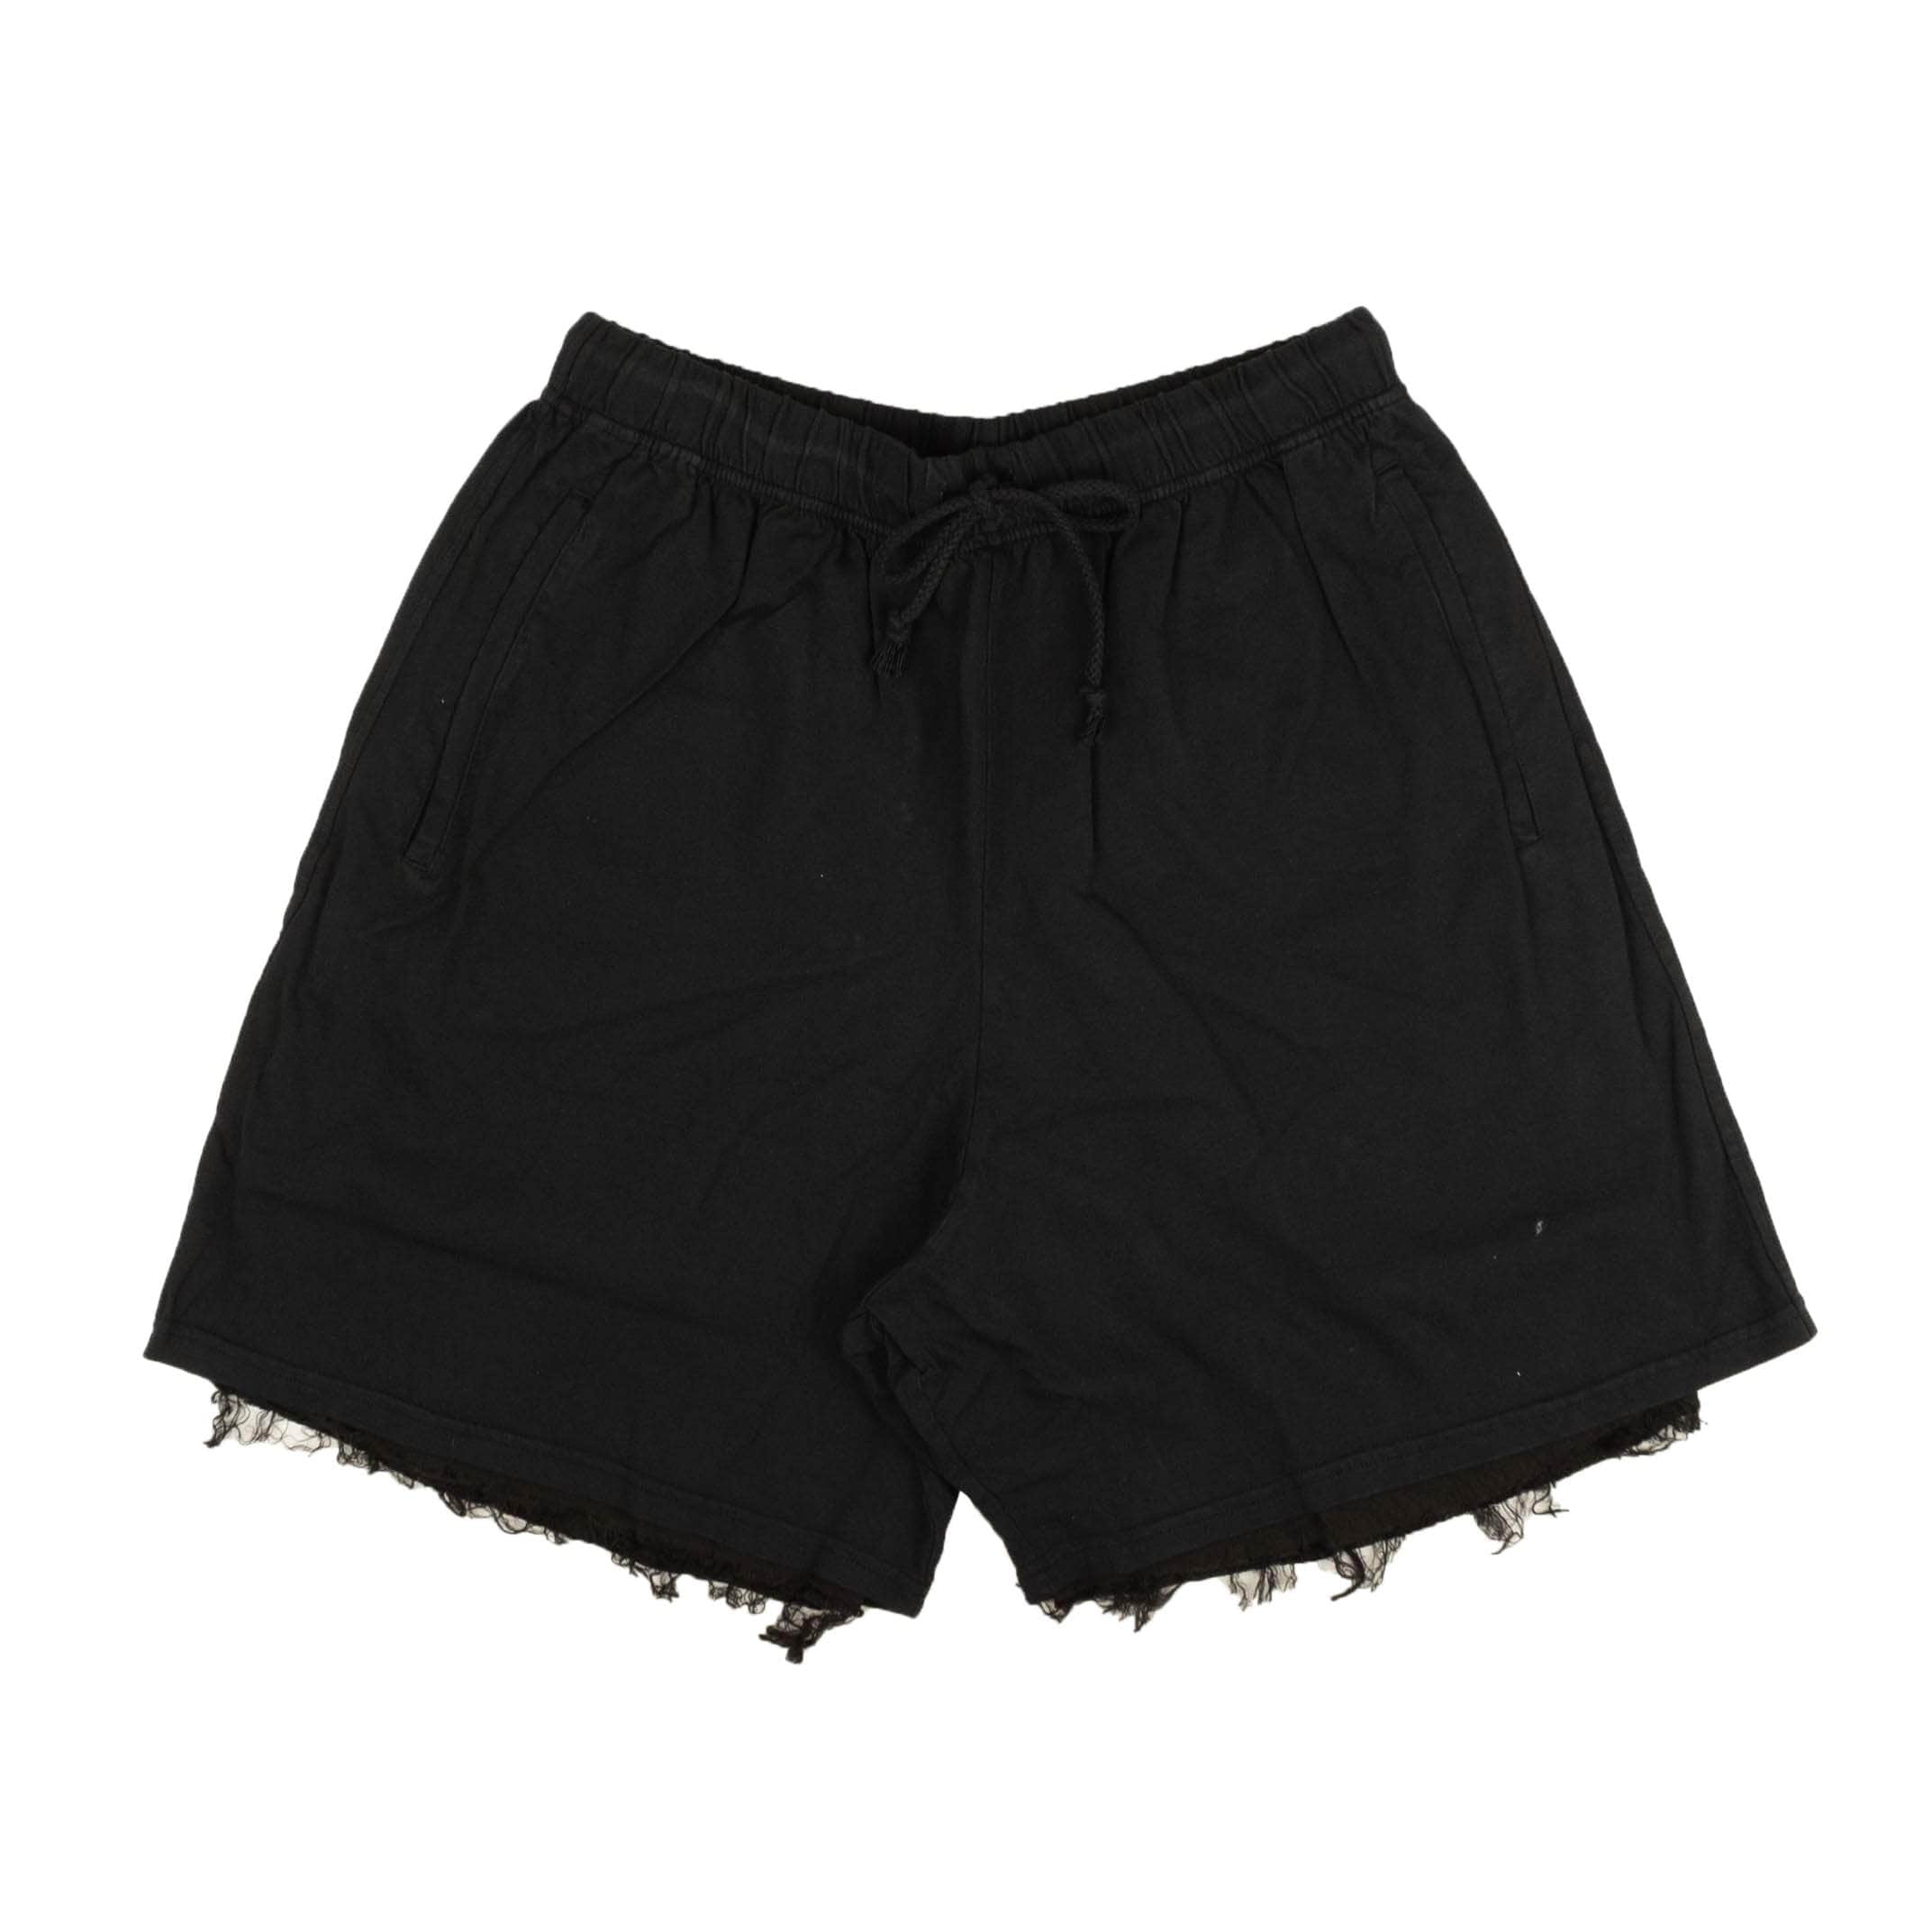 424 ON FAIRFAX 424-on-fairfax, channelenable-all, chicmi, couponcollection, gender-mens, main-clothing, mens-shoes, size-l, size-m, under-250 Black Frayed Edge Cotton Drawstring Shorts